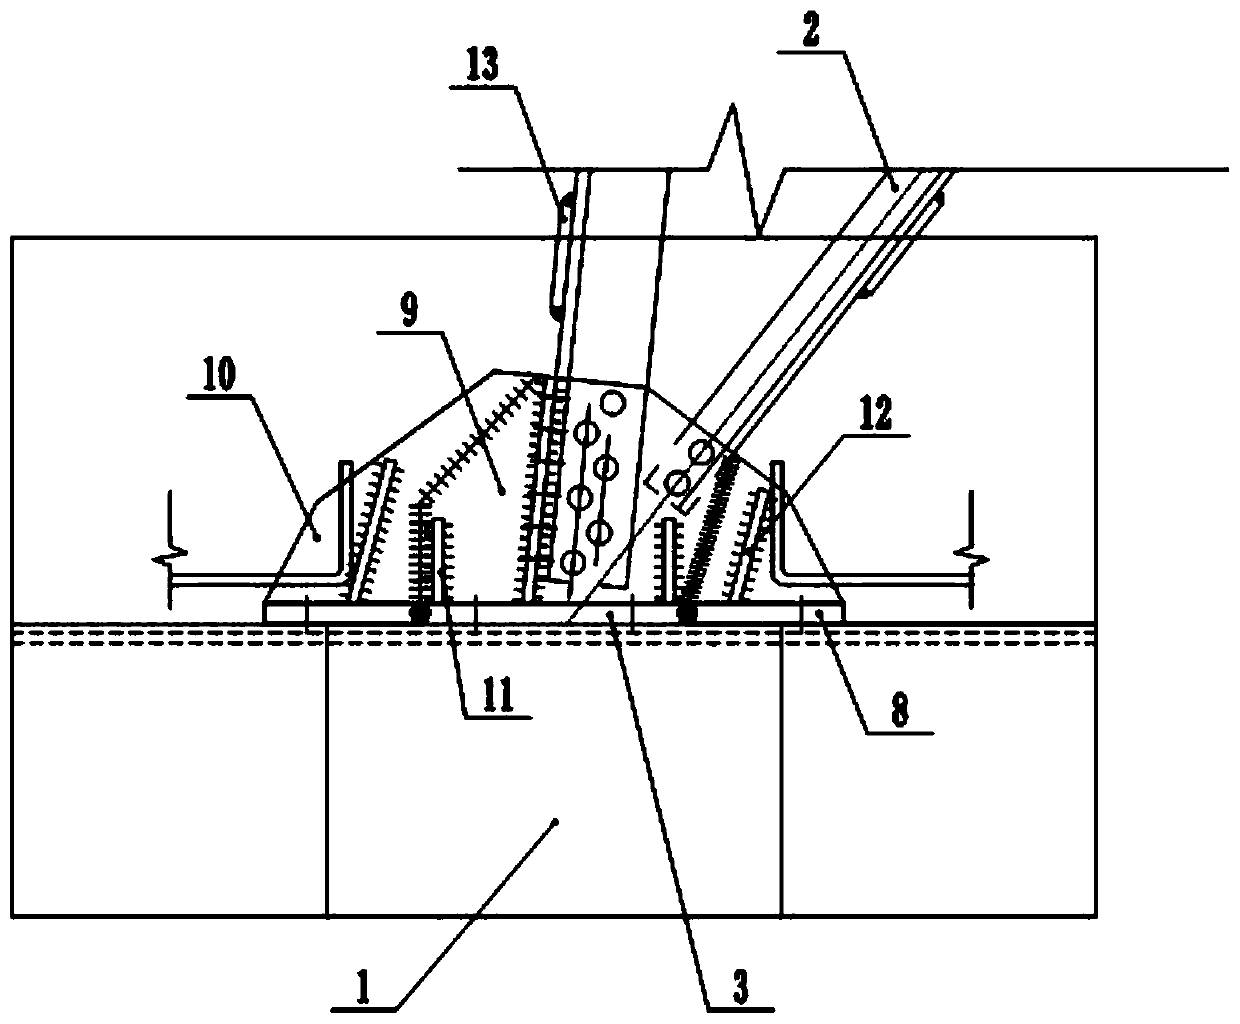 Integral reinforcing device and method for transmission tower base and component